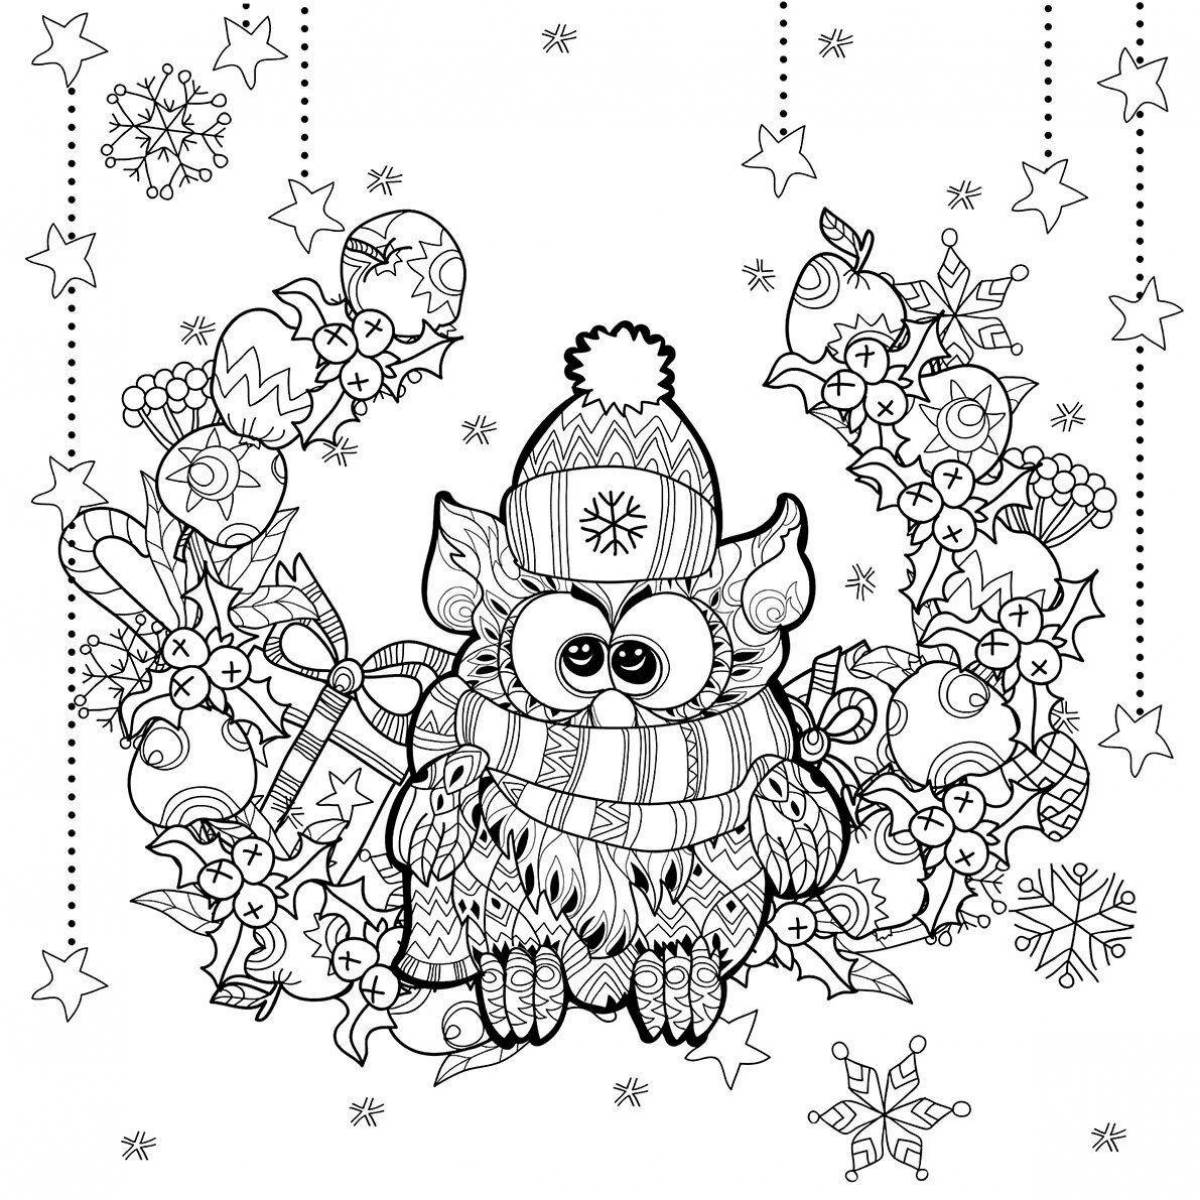 Sublime Christmas coloring book for adults